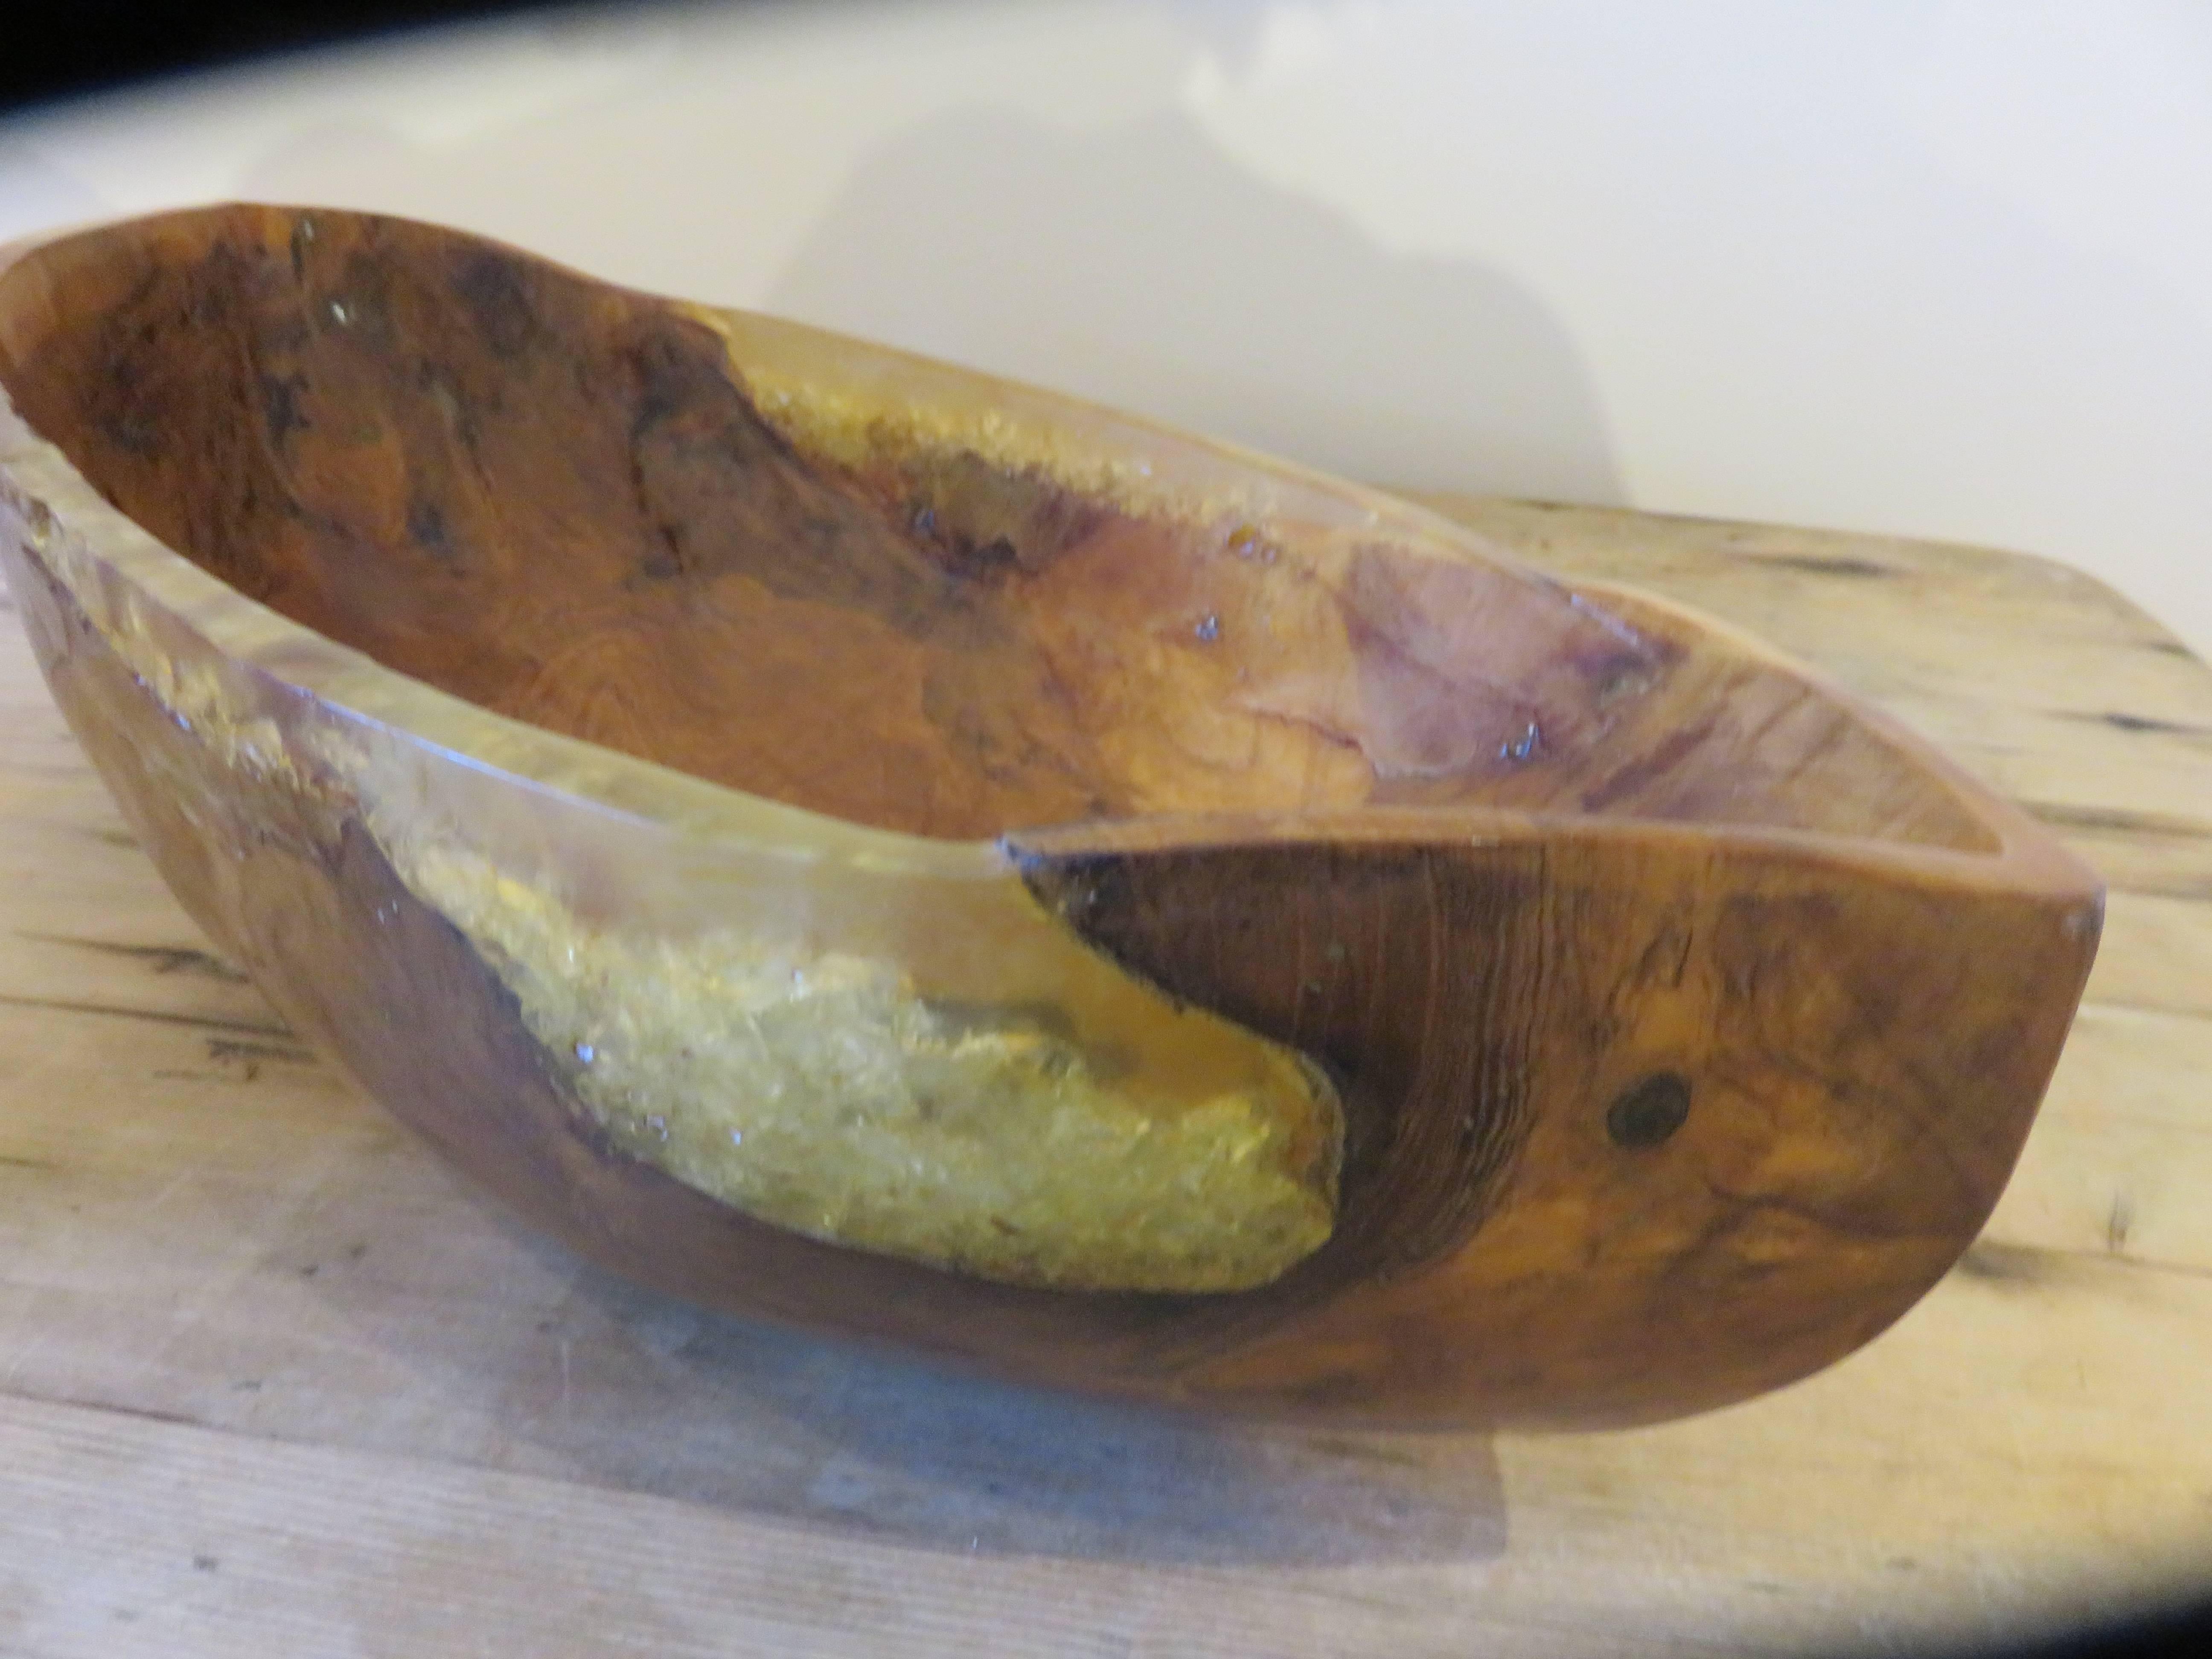 Modern Studio Crafted Olive Wood and Crystallized Resin Vessel by Taylor Povic